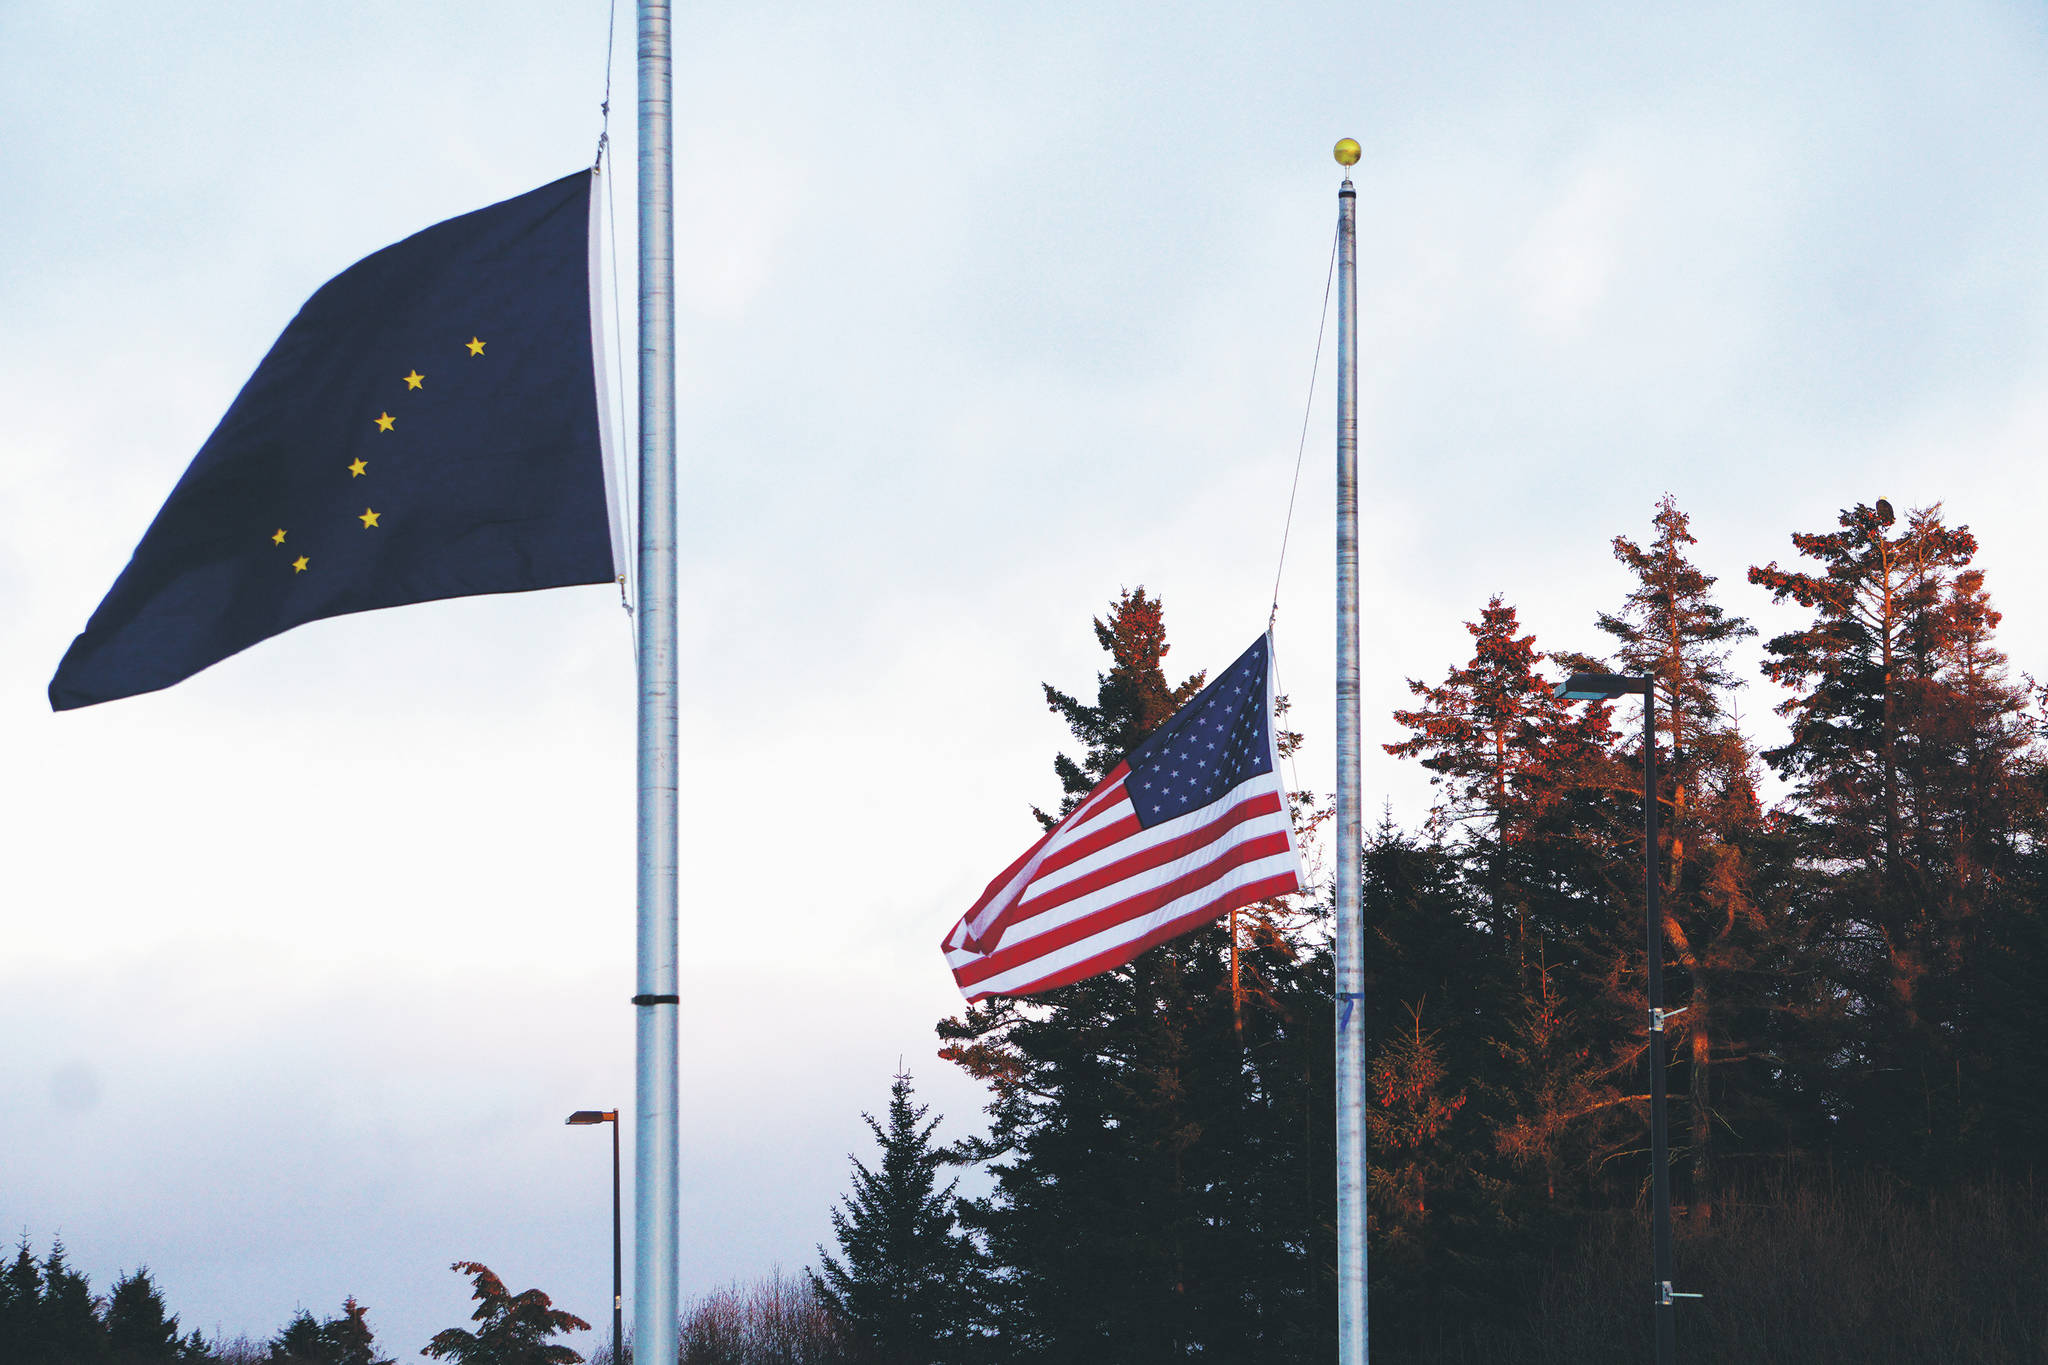 The Alaska and U.S. flags fly at half staff on Monday, Feb. 22, 2021, at the Alaska Islands and Ocean Vistor Center. President Joe Biden on Monday ordered flags to be flown at half staff at federal facilities for five days to honor the 500,000 Americans who have died of COVID-19. (Photo by Michael Armstrong/Homer News)